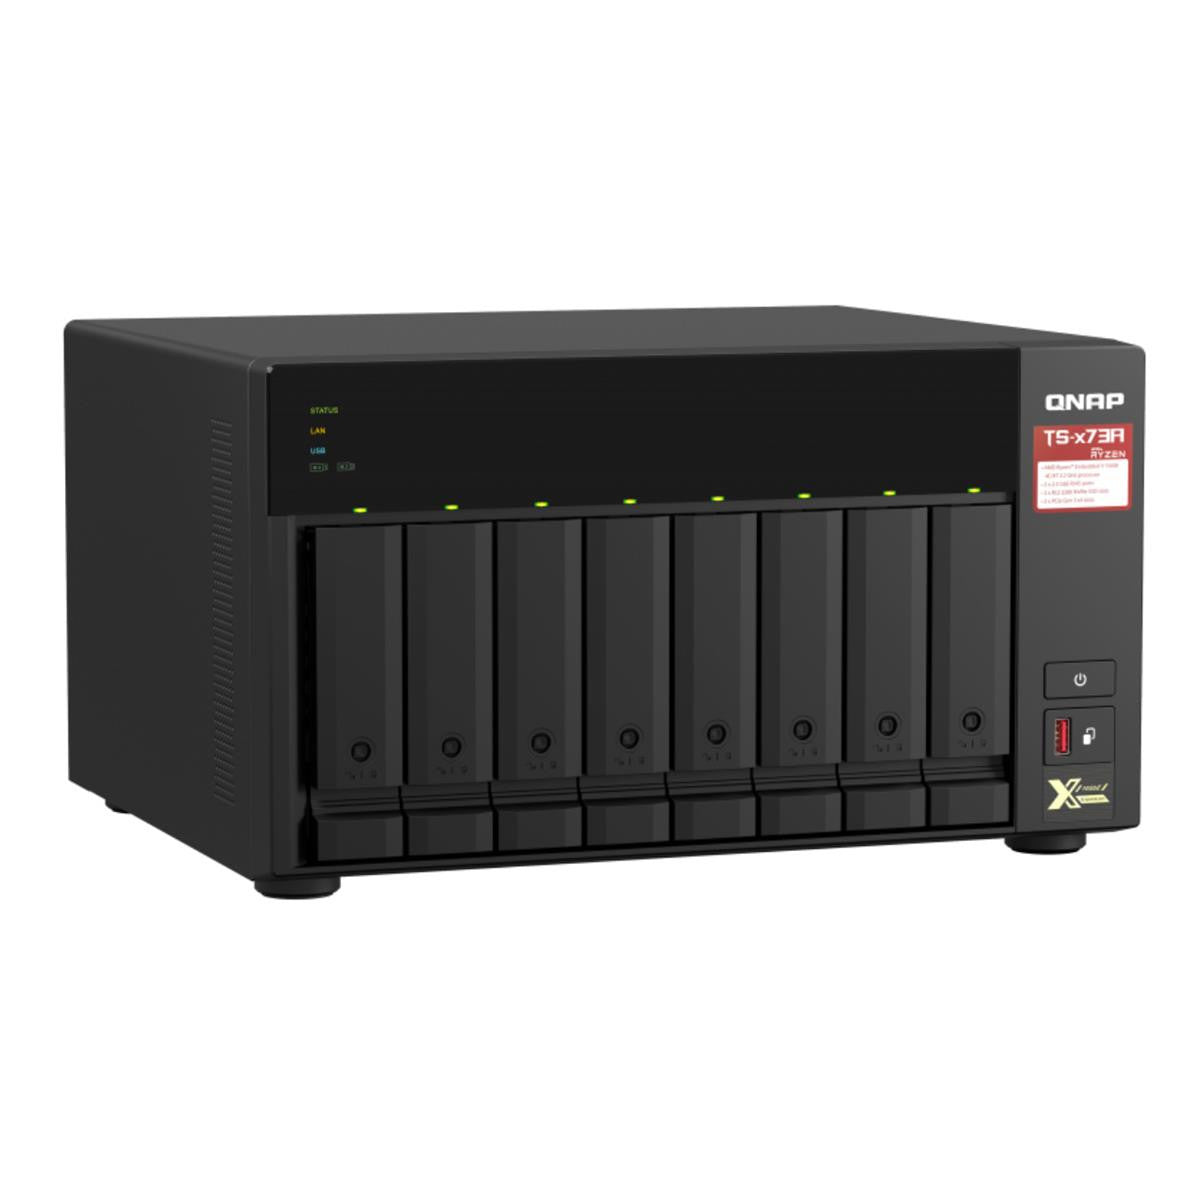 QNAP TS-873A 8-BAY NAS with 64GB DDR4 RAM and 64TB (8x8TB) Seagate Ironwolf NAS Drives Fully Assembled and Tested